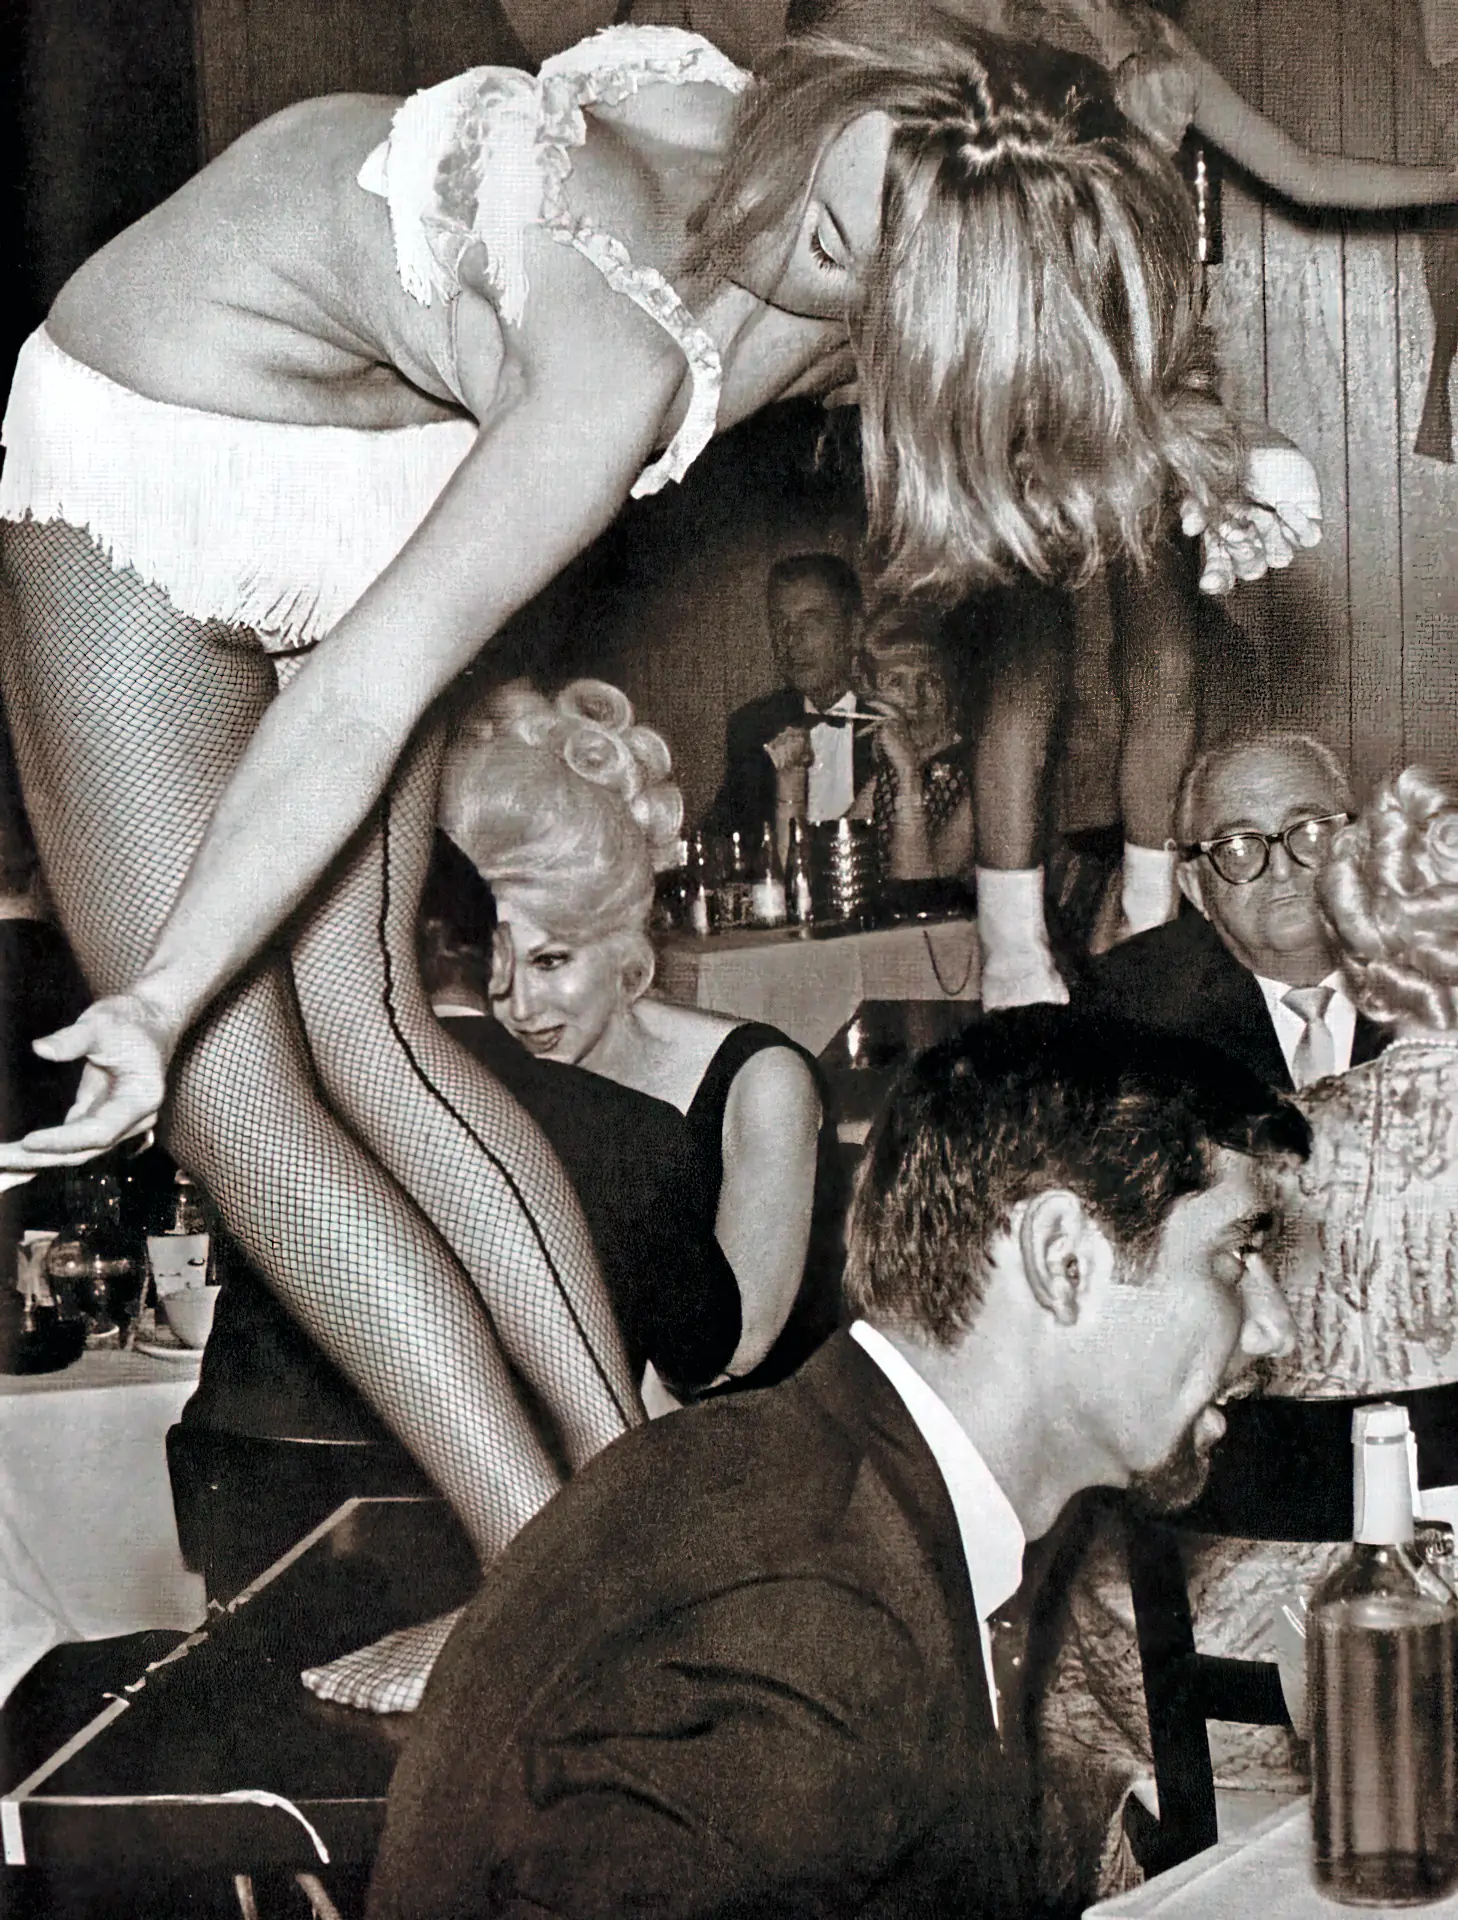 Vintage stripper porn photo Burlesque girl in white undies dances on the table in a room full of people